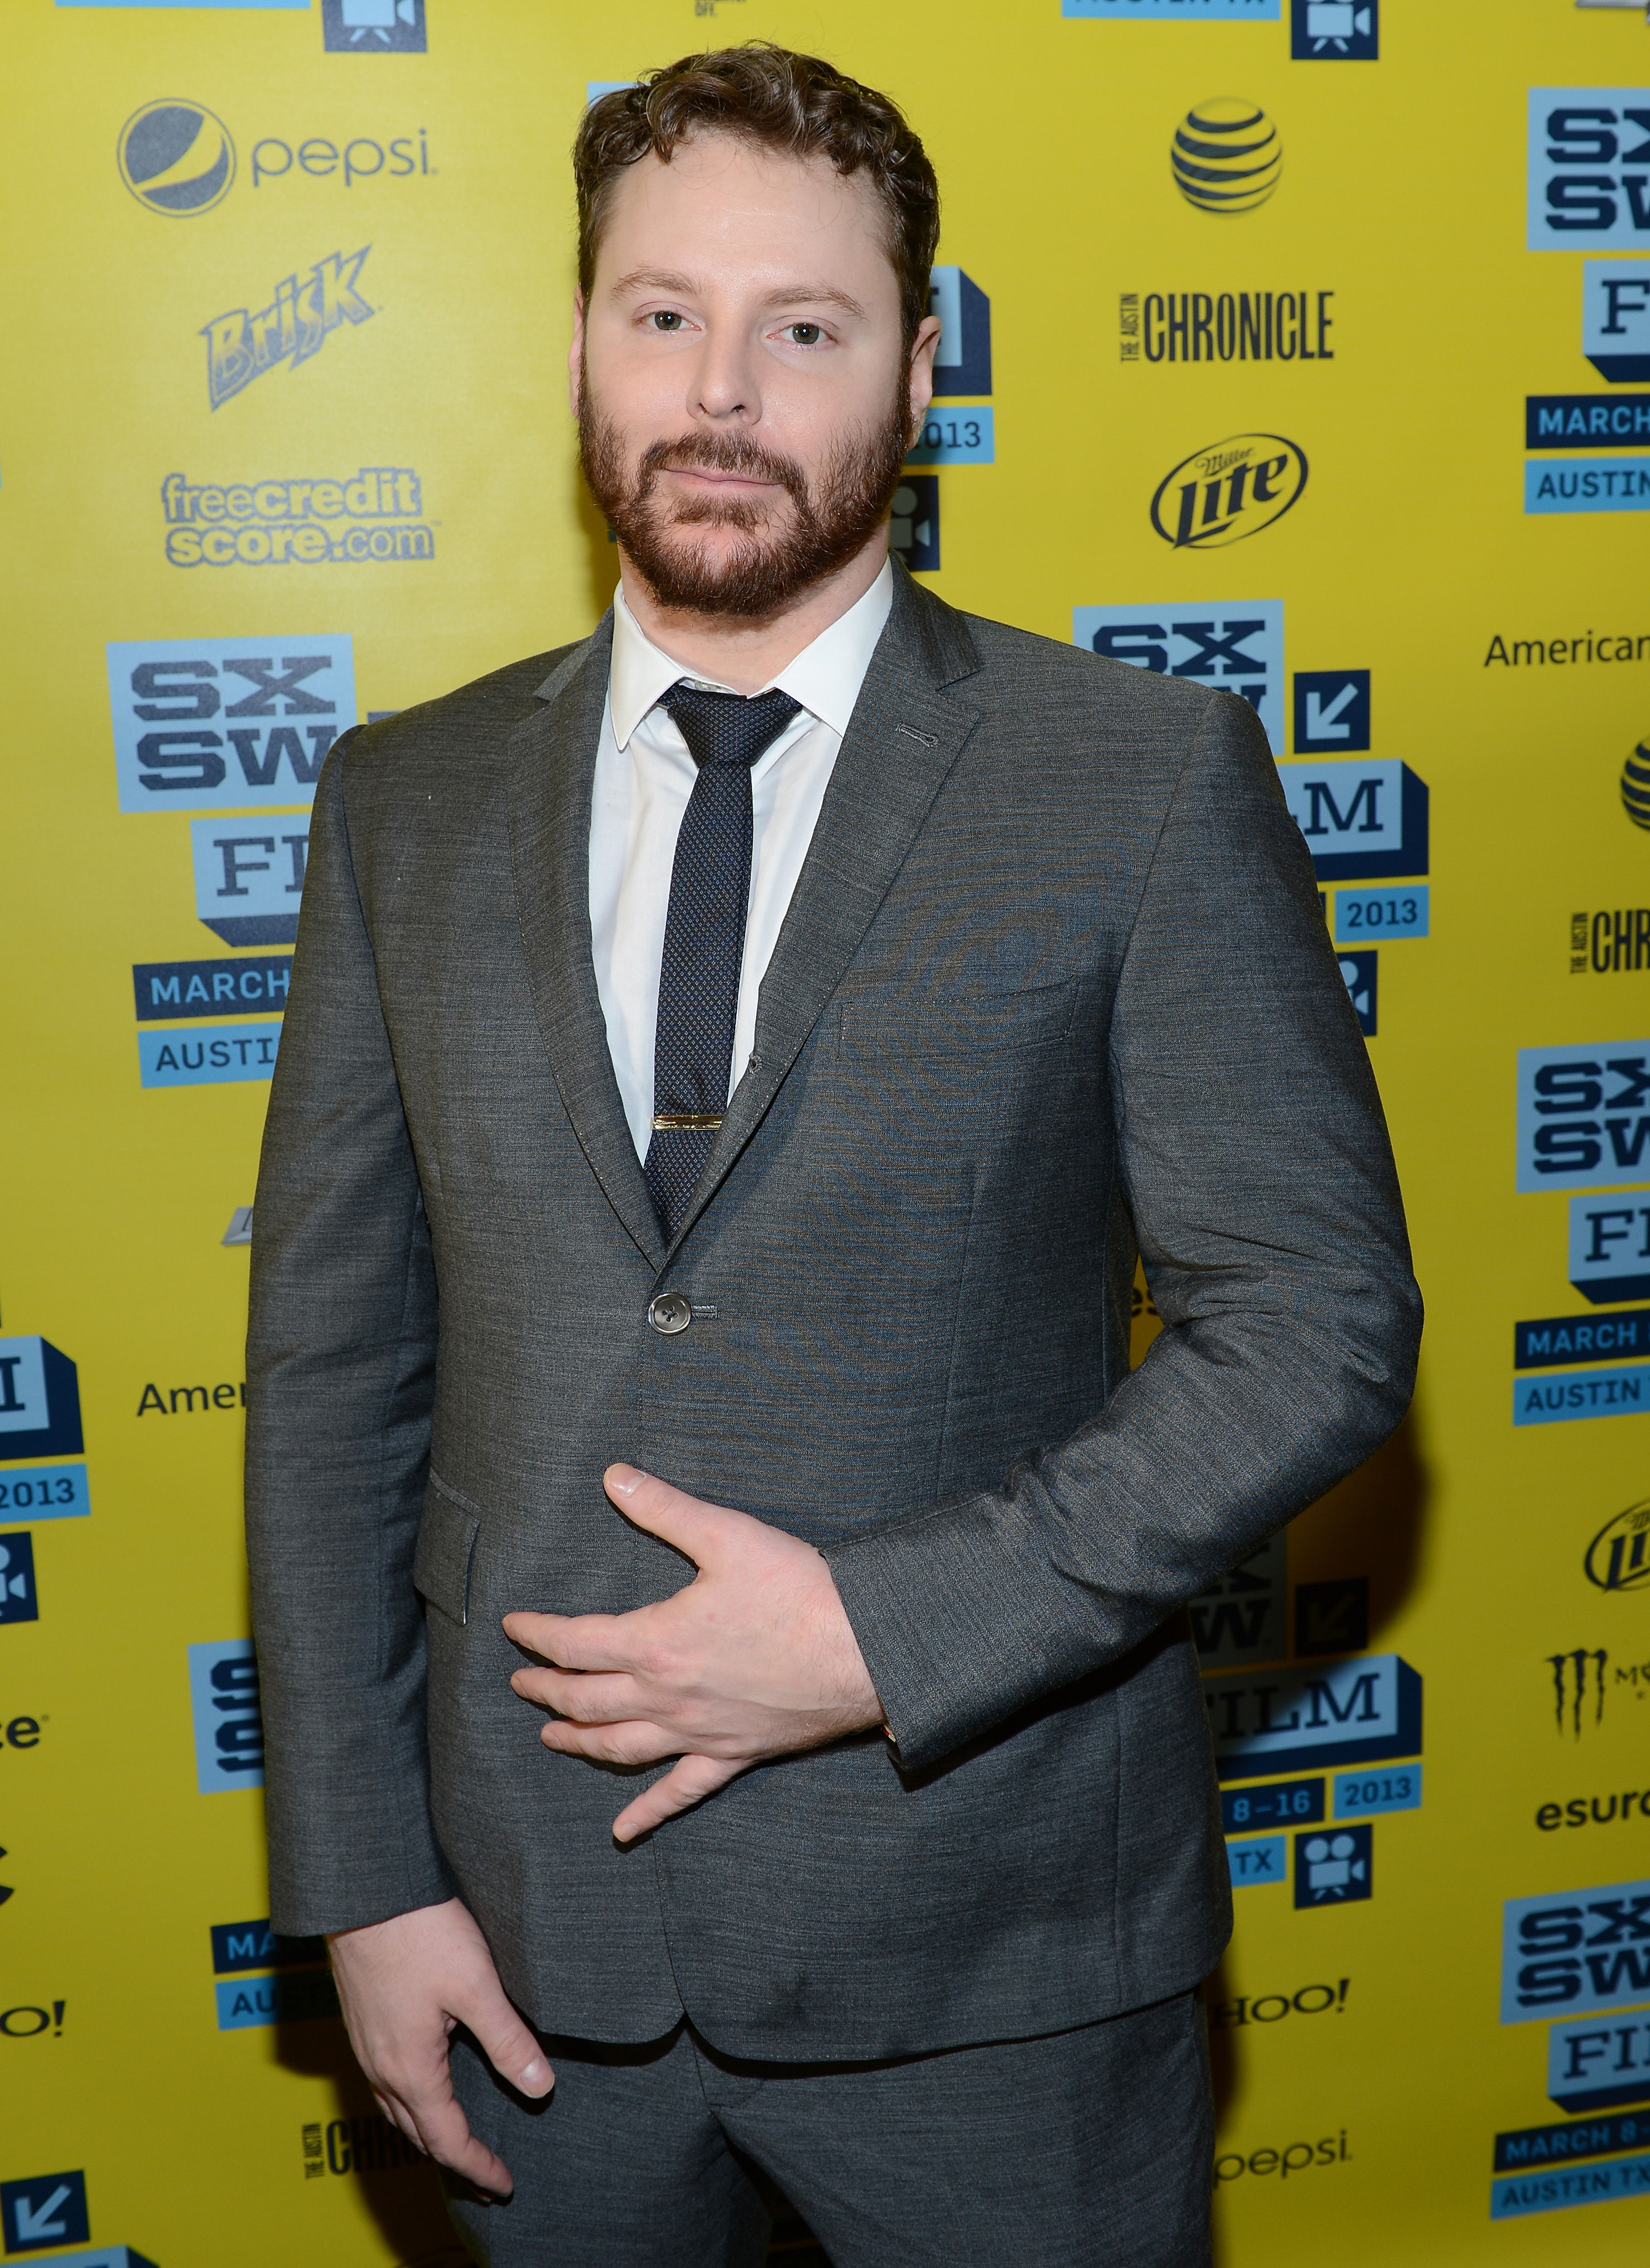 Sean Parker attends the World Premiere of "Downloaded" during the 2013 SXSW Music, Film + Interactive Festival at Paramount Theatre in Austin on March 10, 2013. (Michael Buckner—Getty Images)